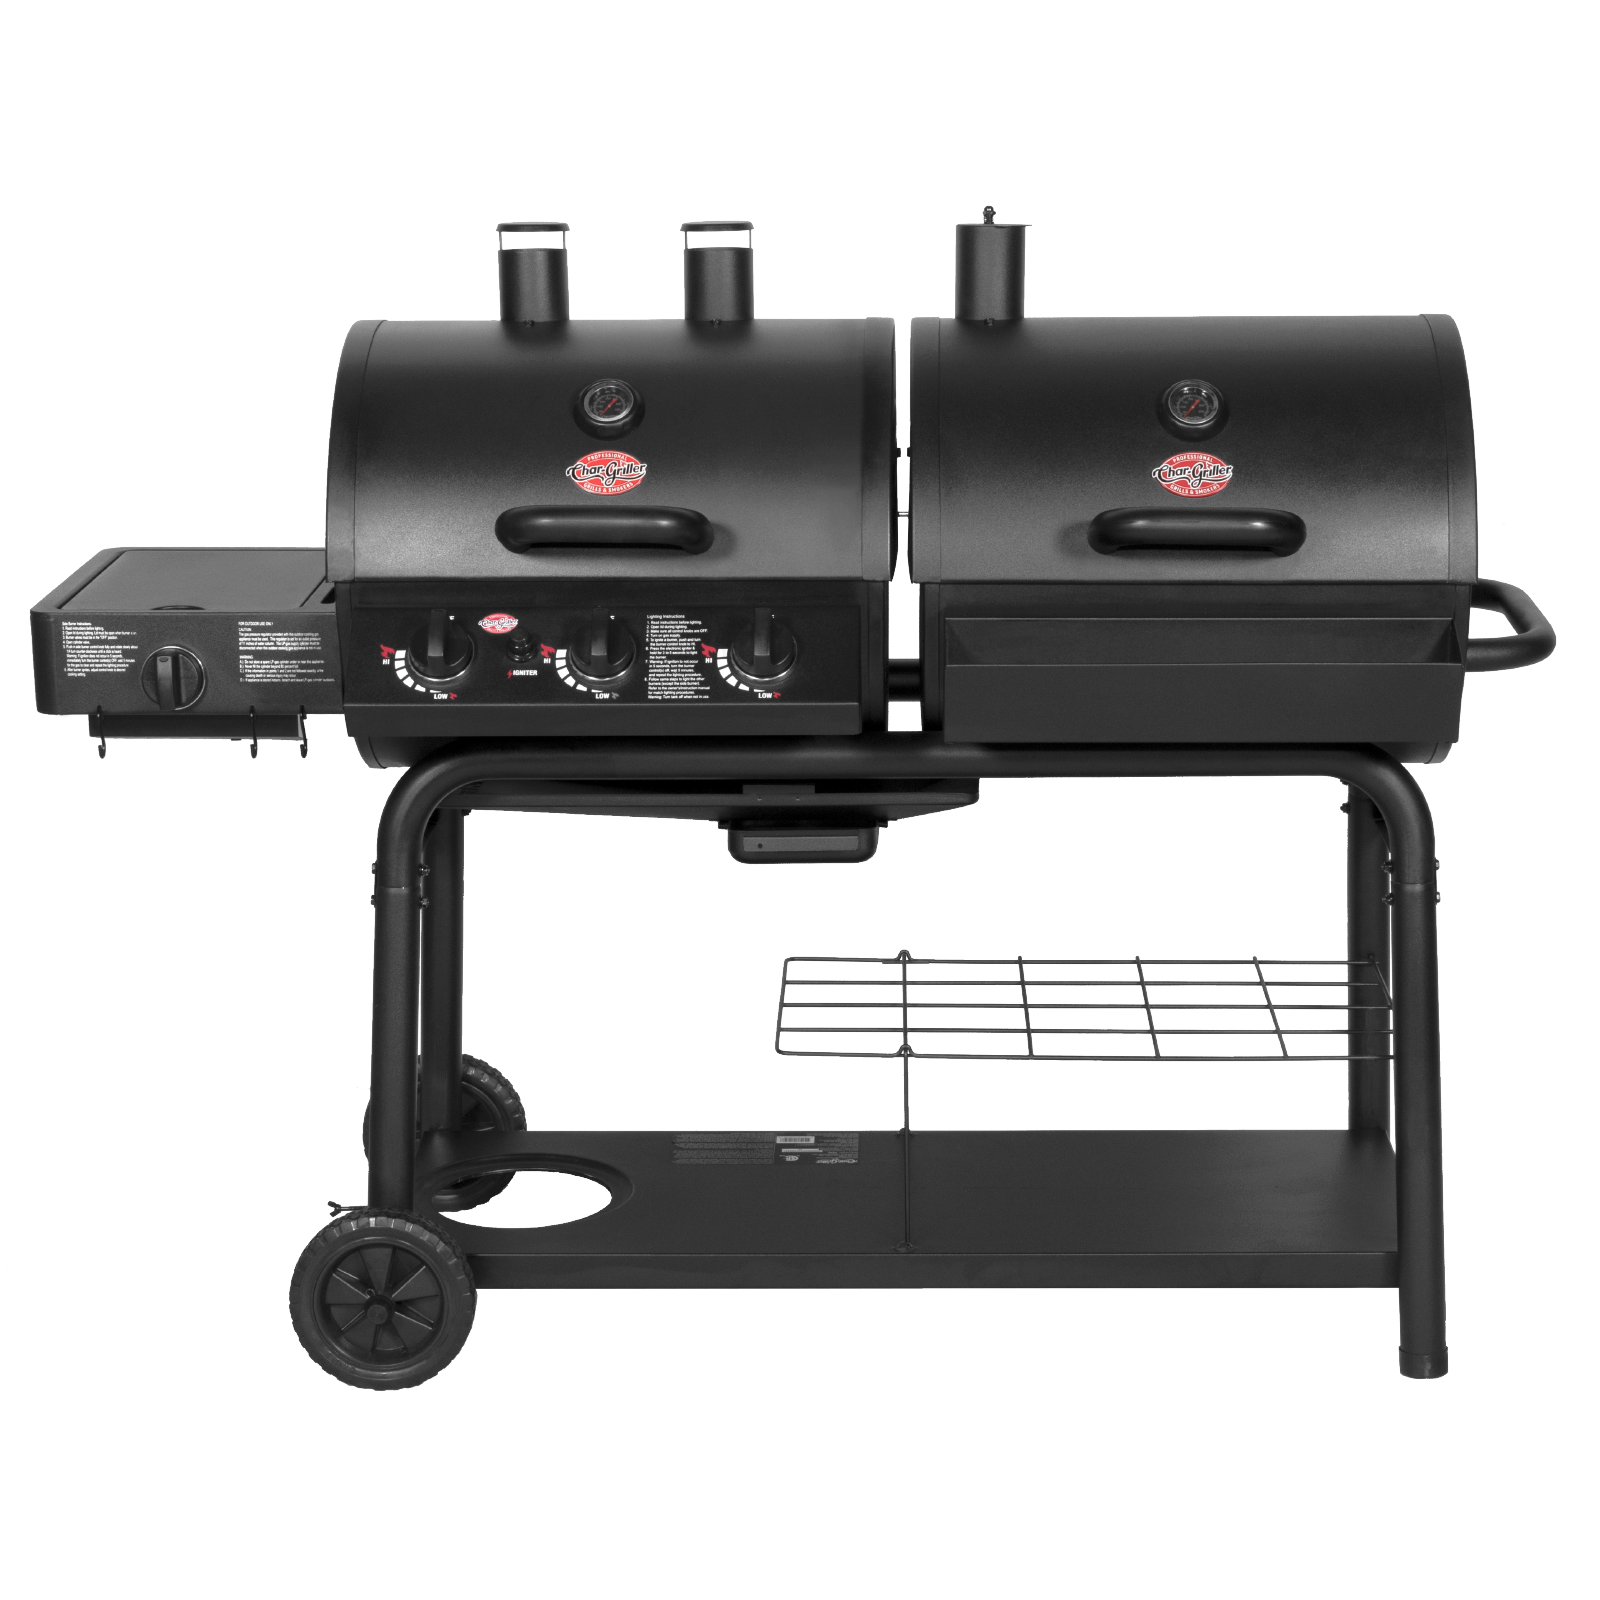 uvidenhed Abundantly biografi Duo™ 5050 Gas & Charcoal Grill - Char-Griller